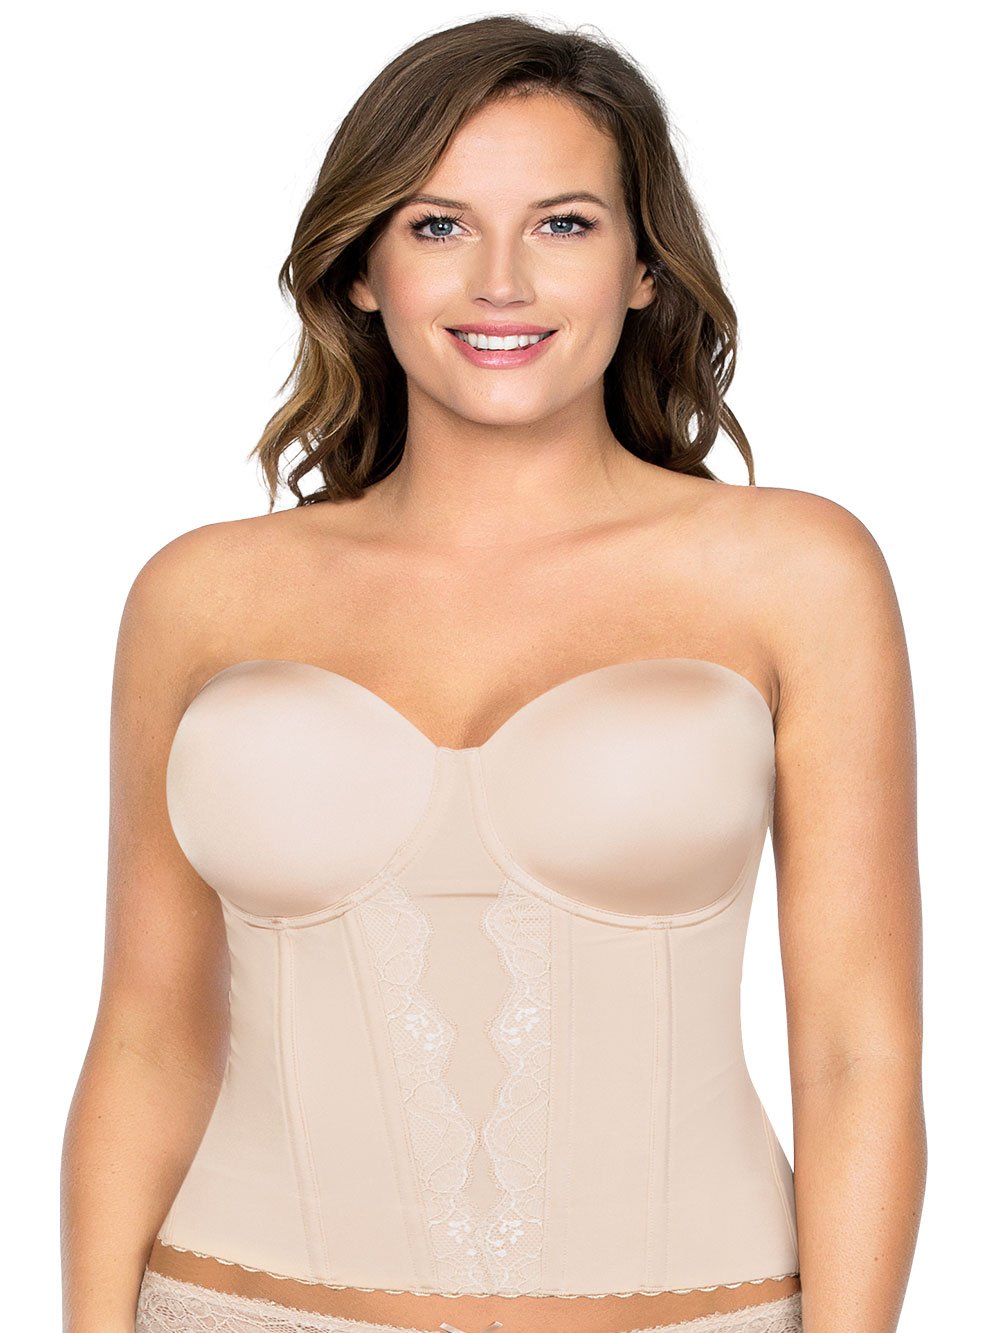 32C Bras: Bra Cup Size for 32C Boobs and Breast Size Tagged Underwire  Bras - HauteFlair